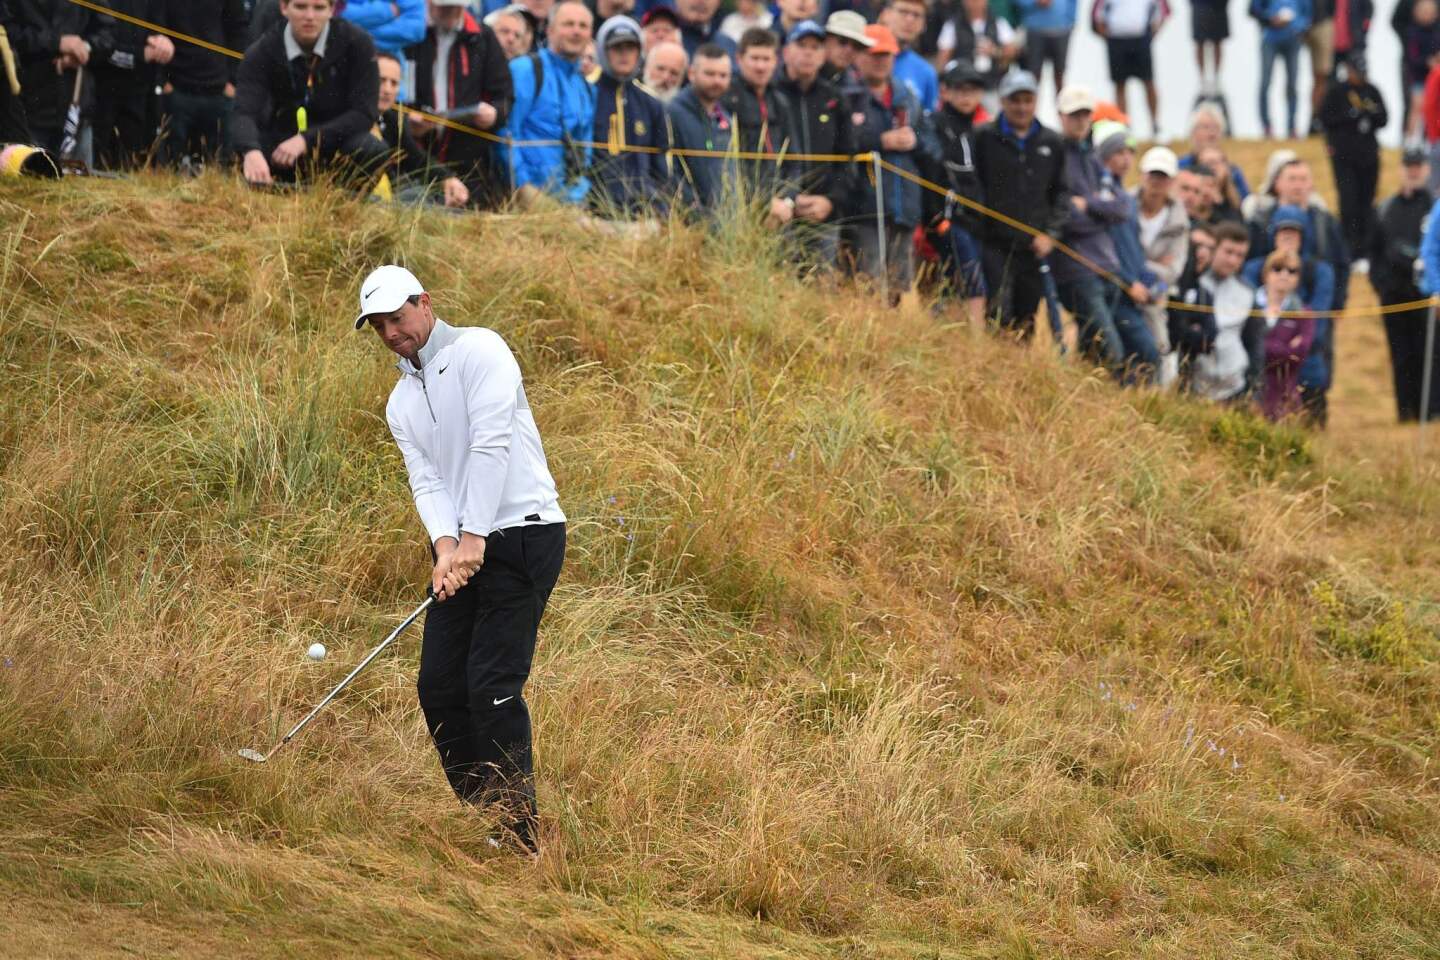 Northern Ireland's Rory McIlroy chips out of the rough on the second hole during the second round of the British Open in Carnoustie, Scotland.